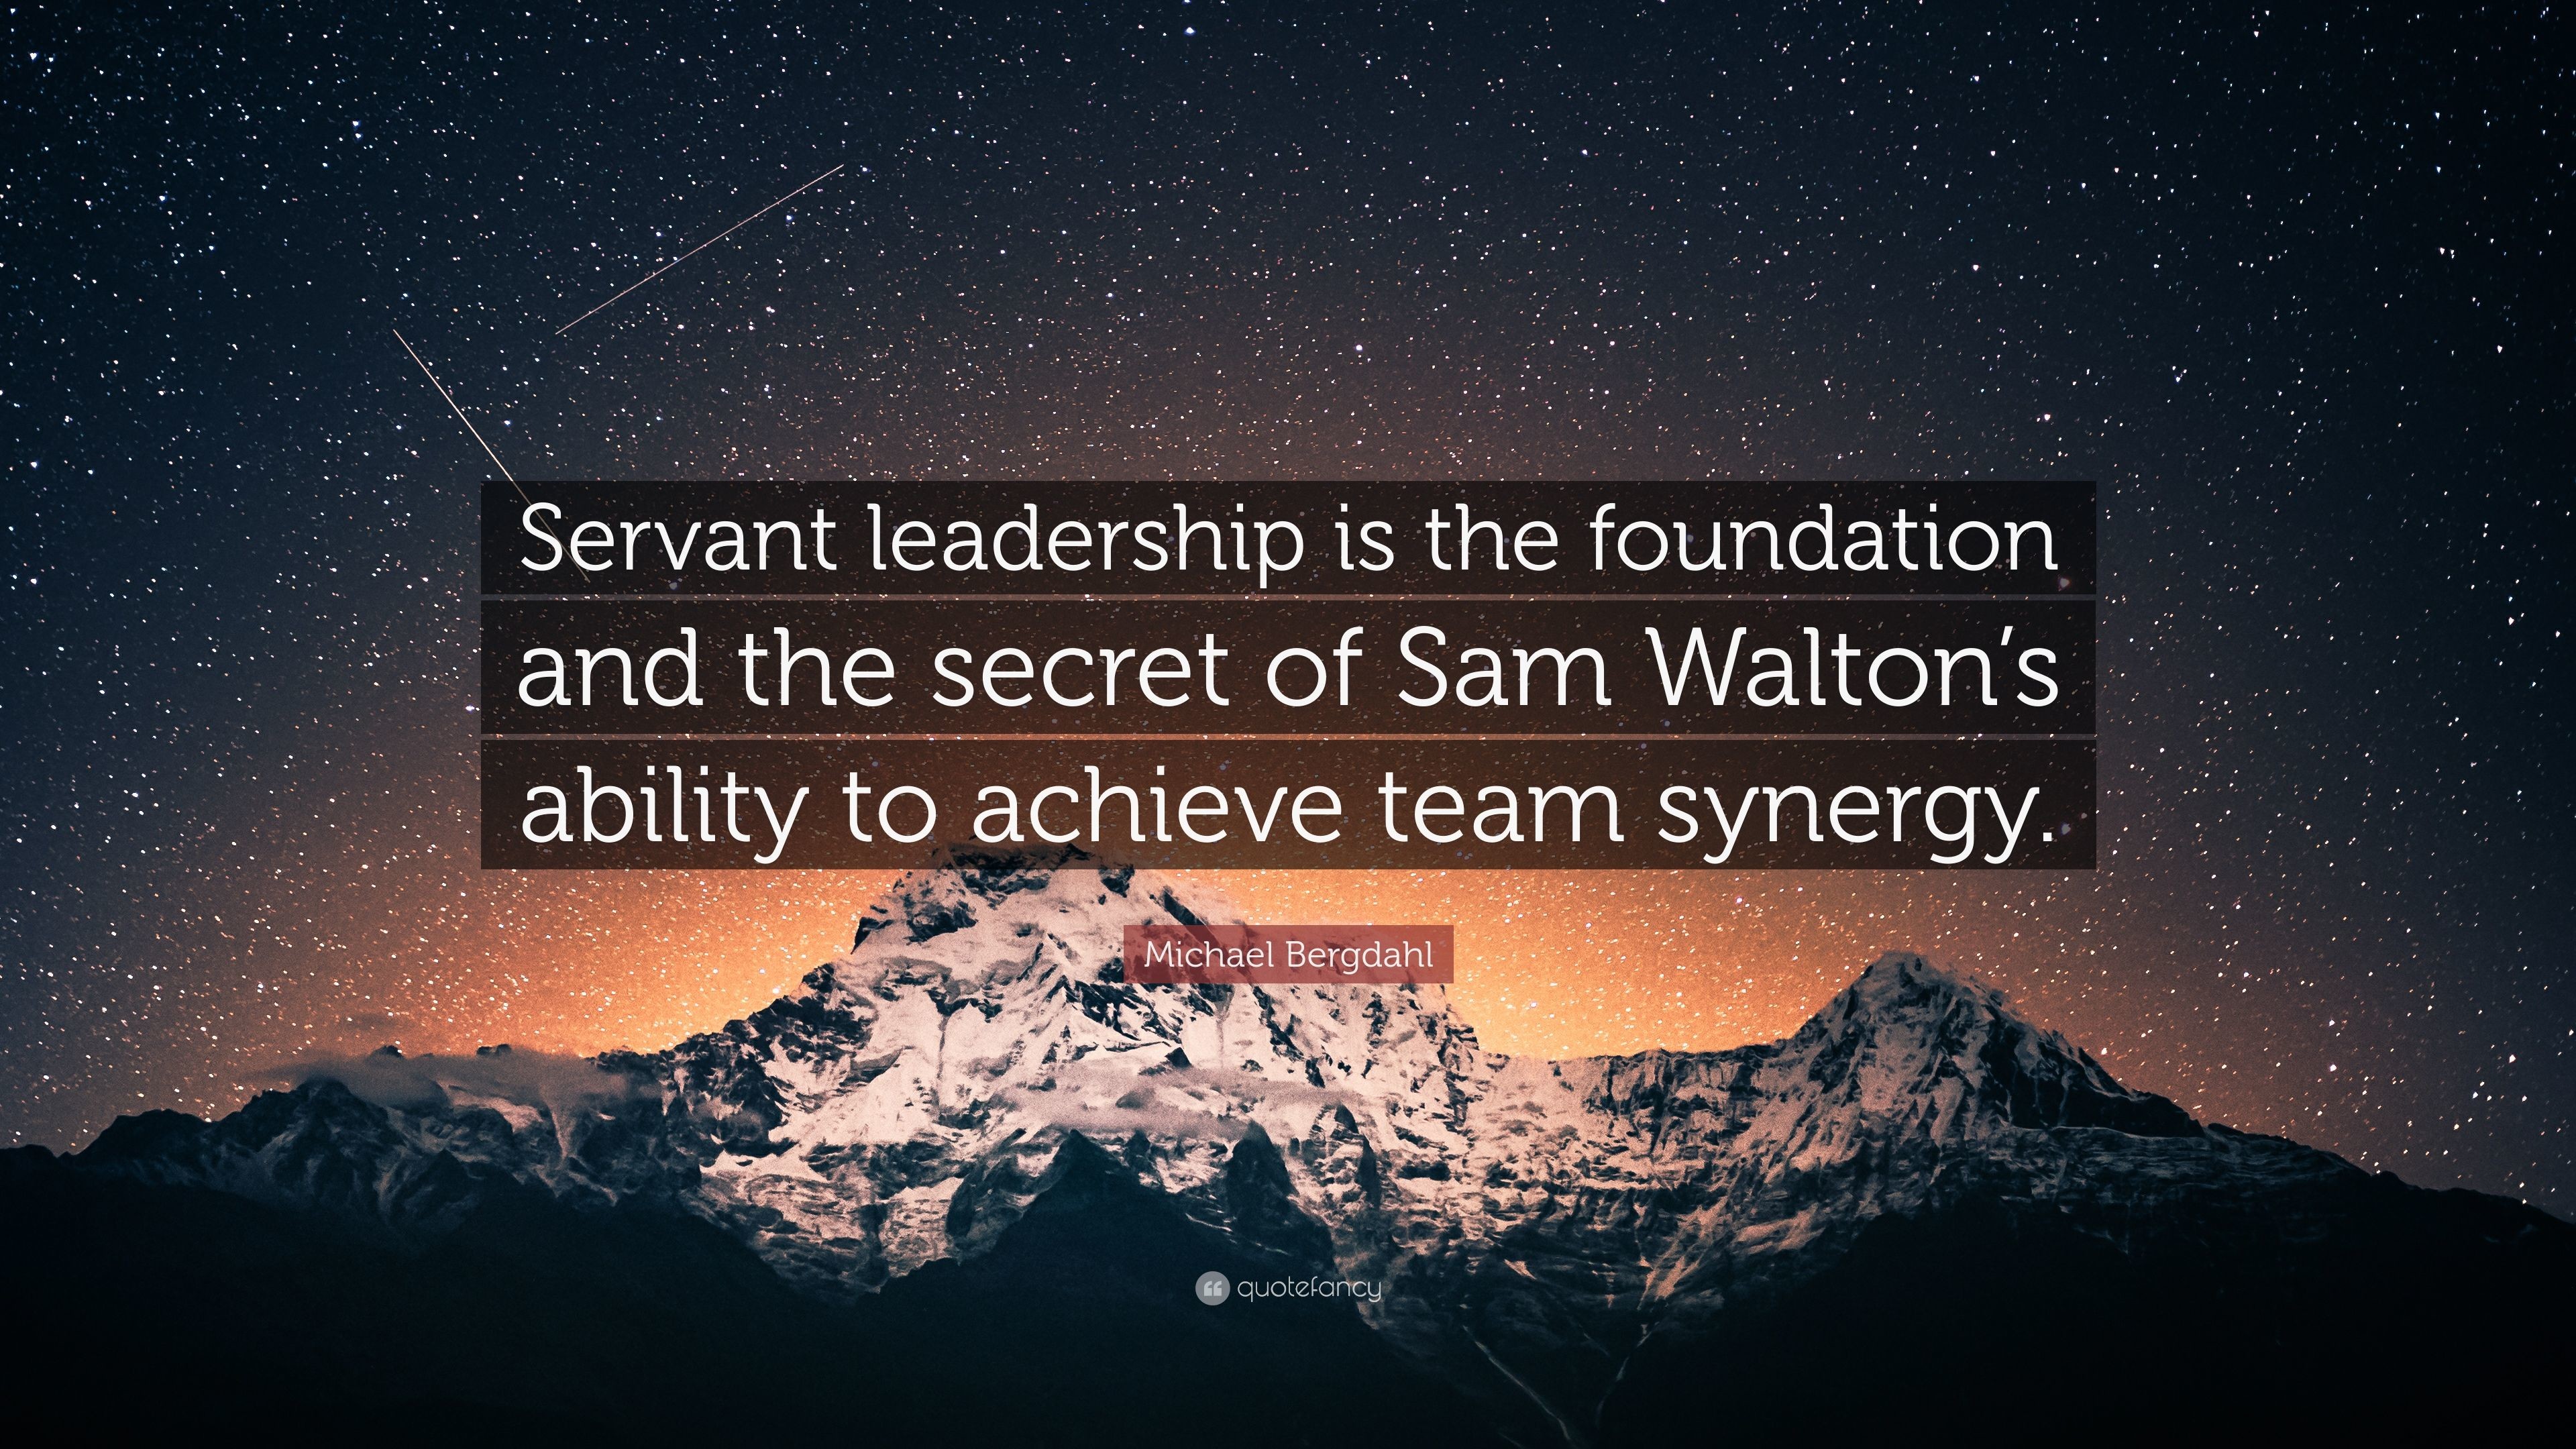 3840x2160 Michael Bergdahl Quote: “Servant leadership is the foundation and the secret  of Sam Walton's